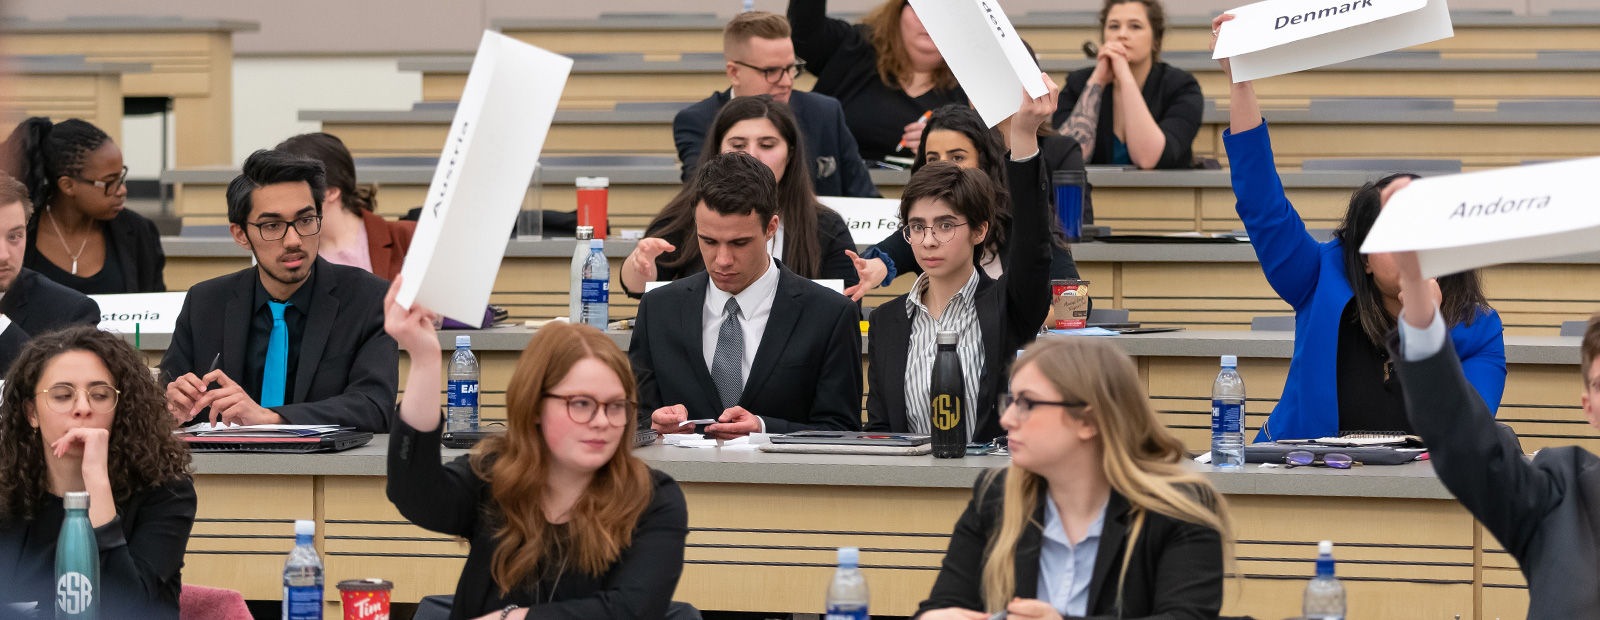 Model United Nations Conference Students